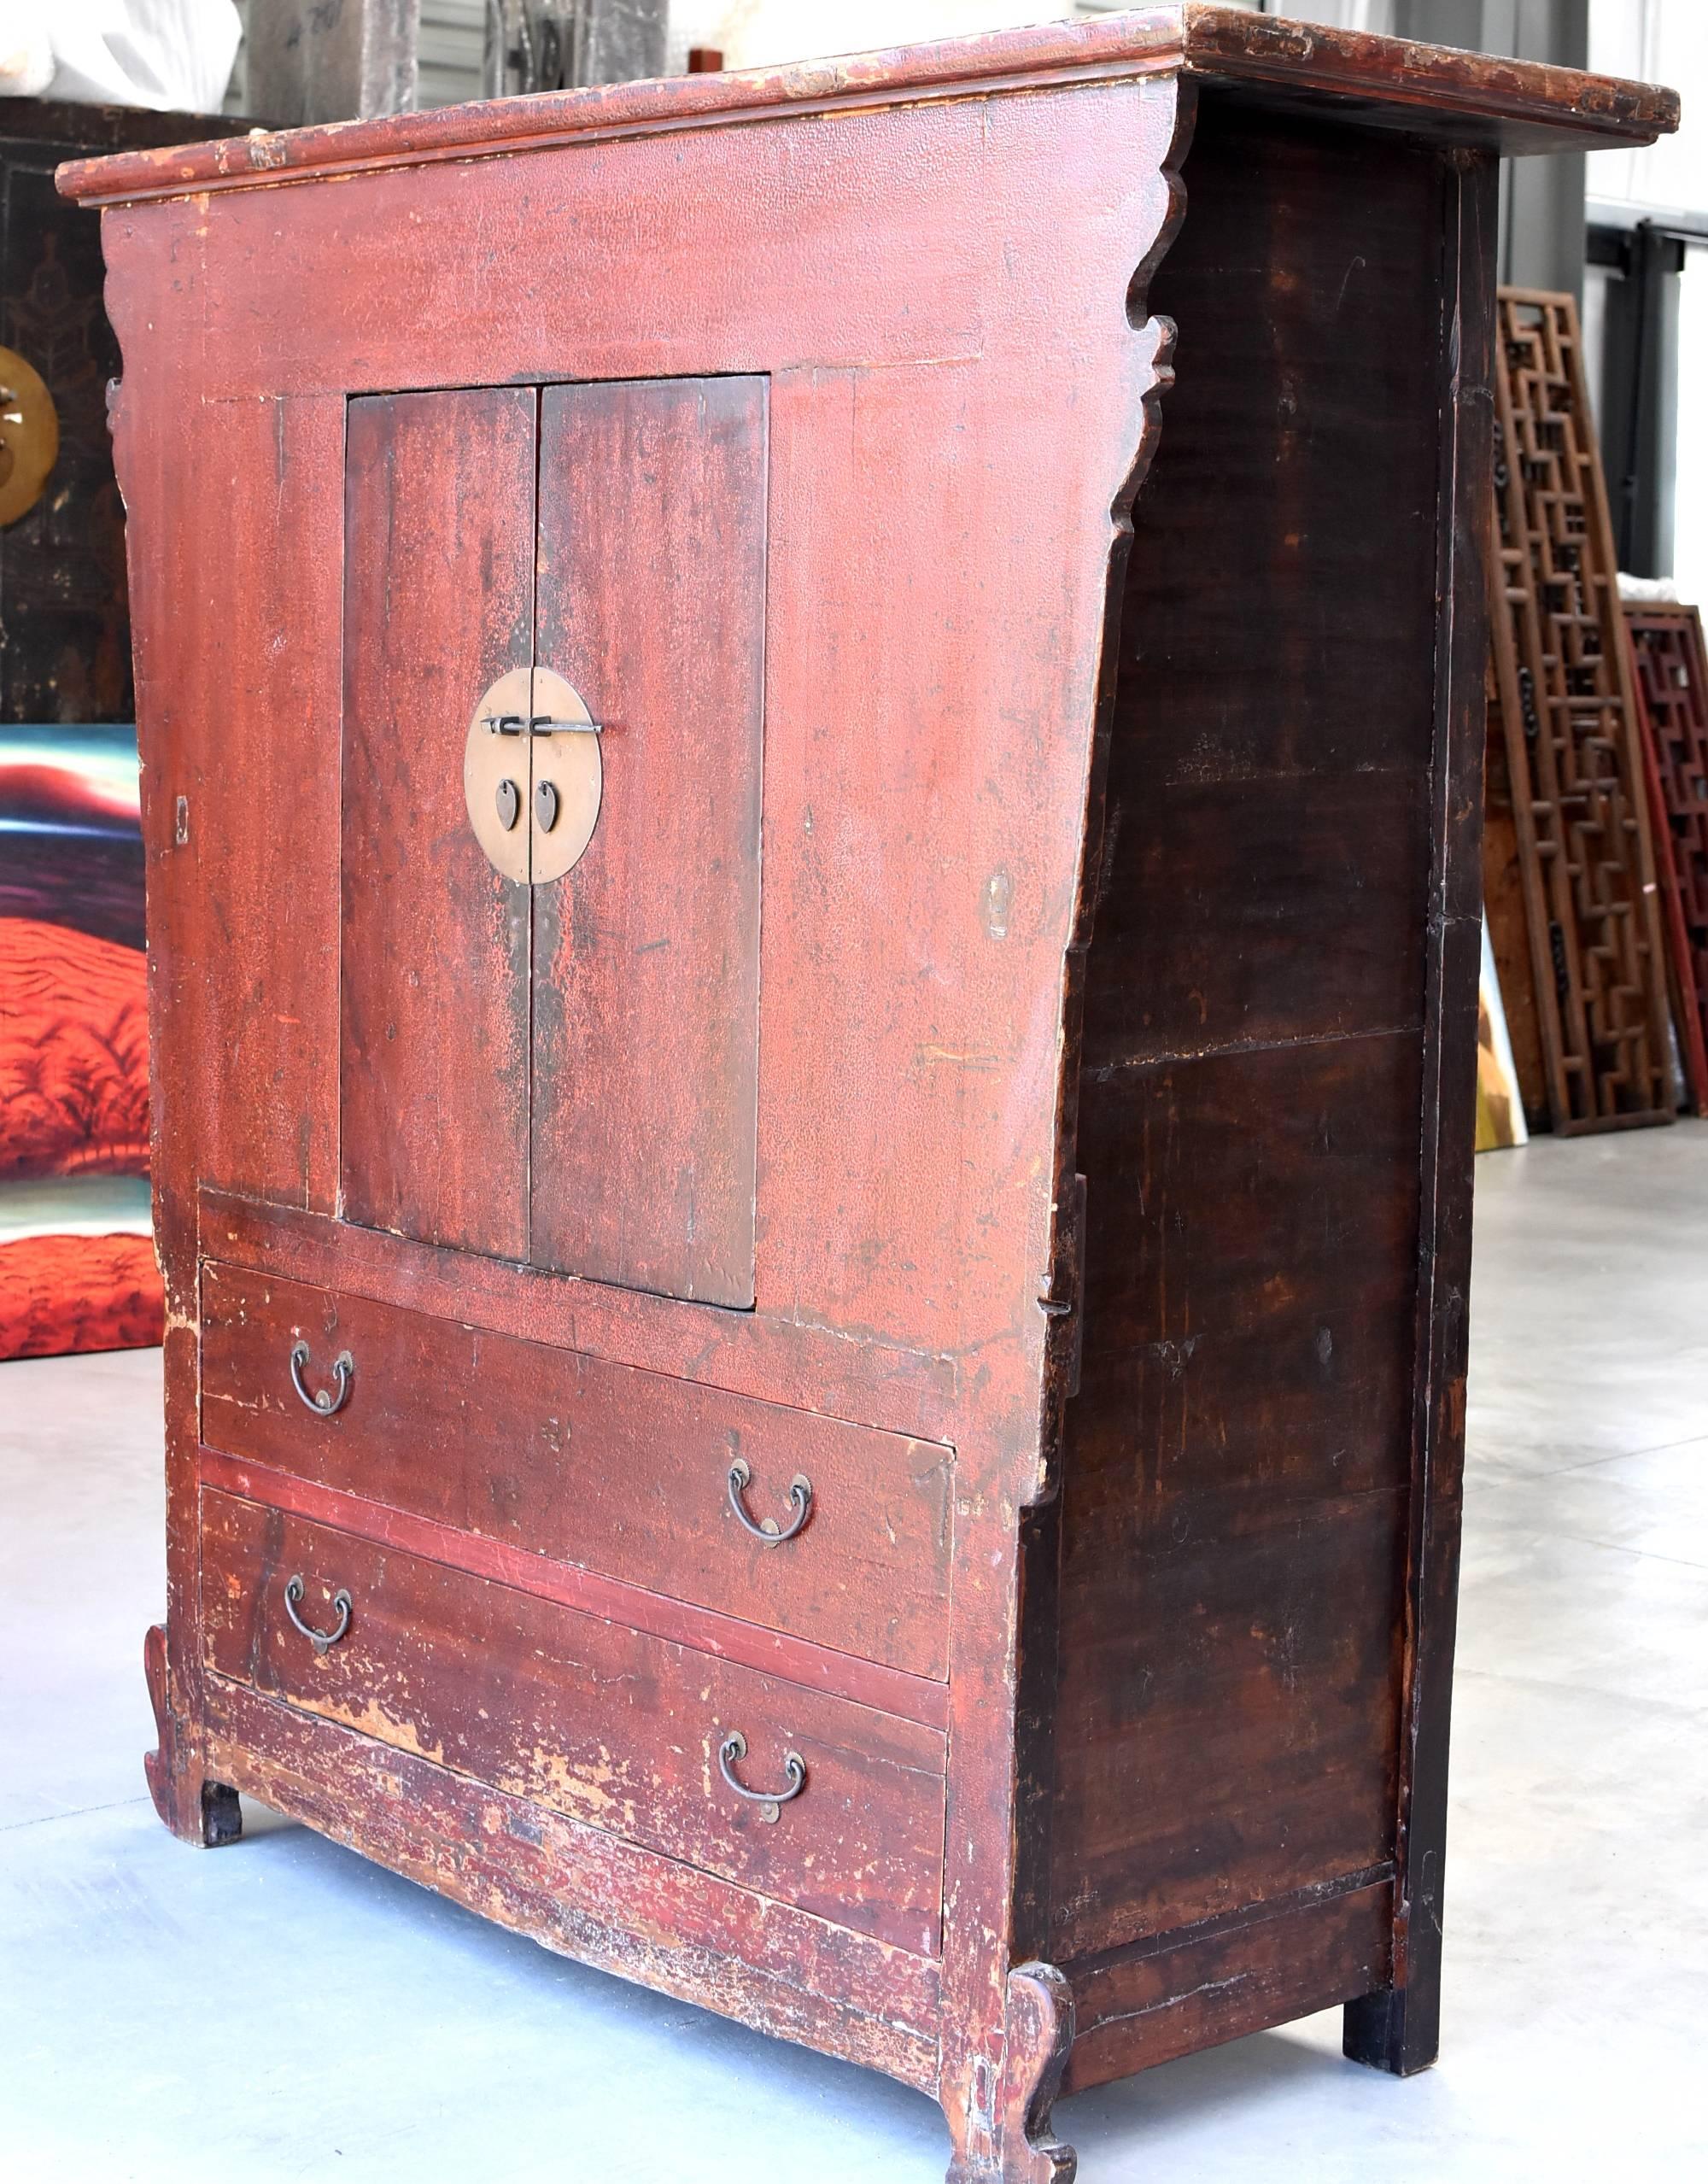 A beautiful antique red crackle cabinet from Shan Xi Province. The style is very unique yet distinctive of the Northern Chinese region. Such a vernacular design is reflected in the following areas: thicker frame works are used in structure, heavier